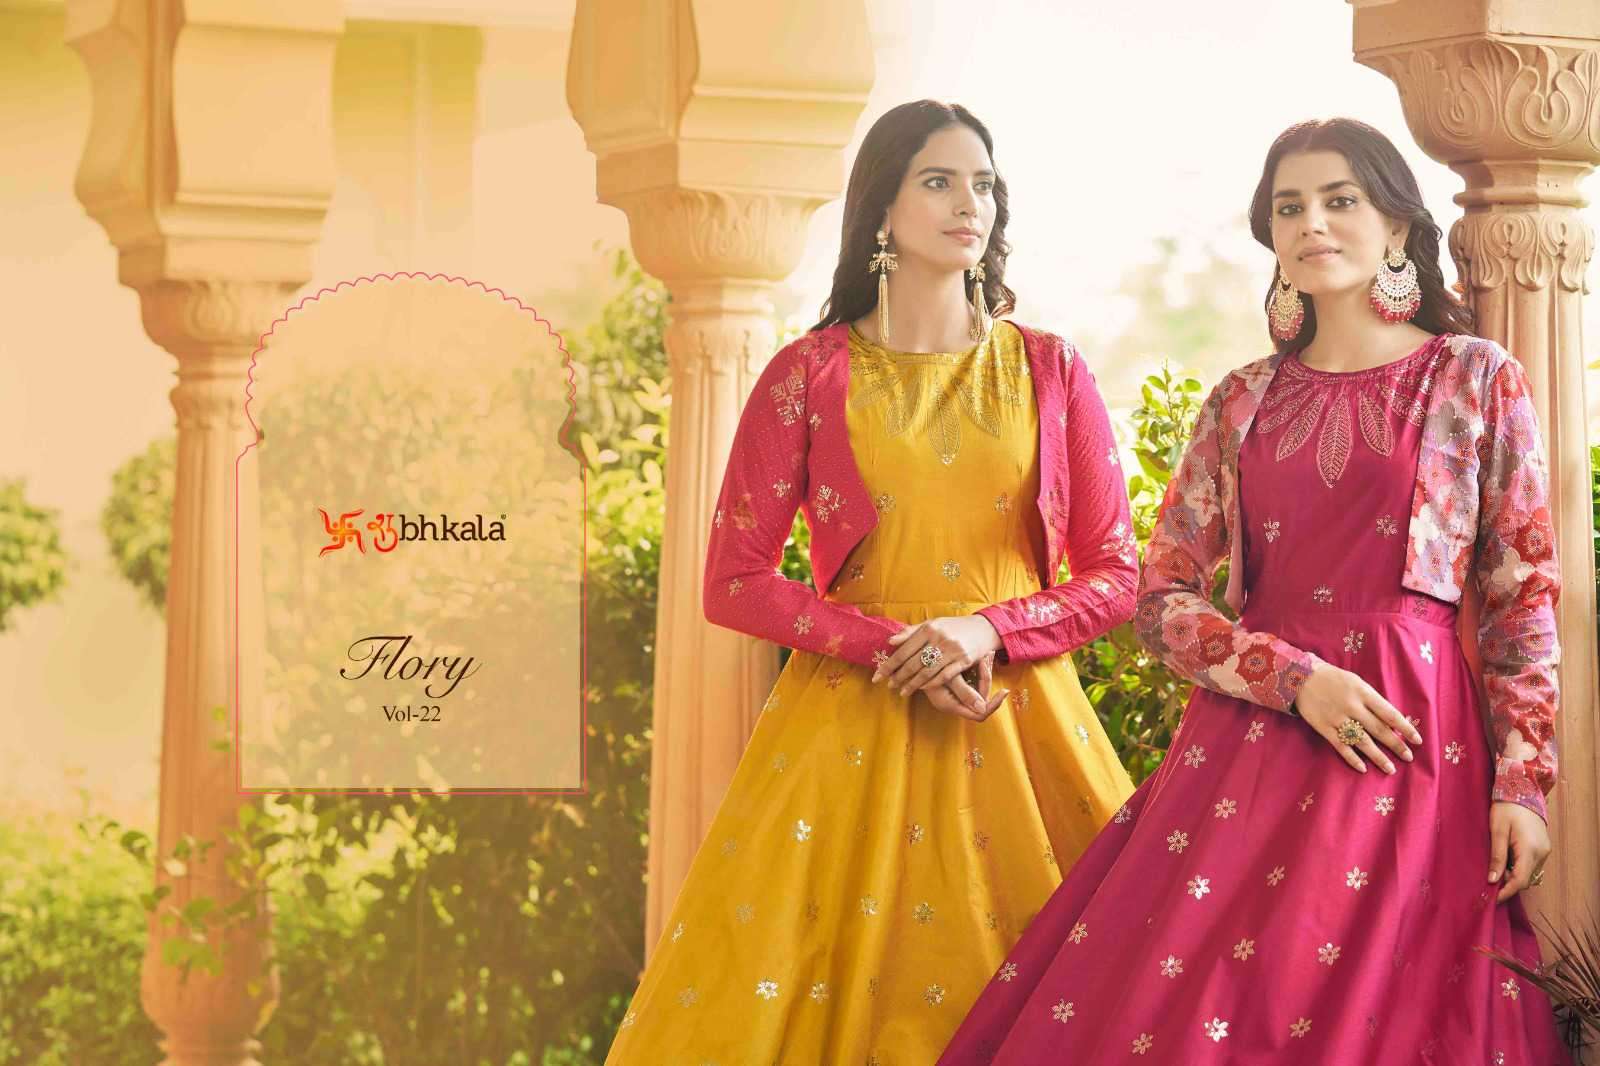 Shubhkala Flory Vol 22 Designer Latest Partywear Gown New Arrivals